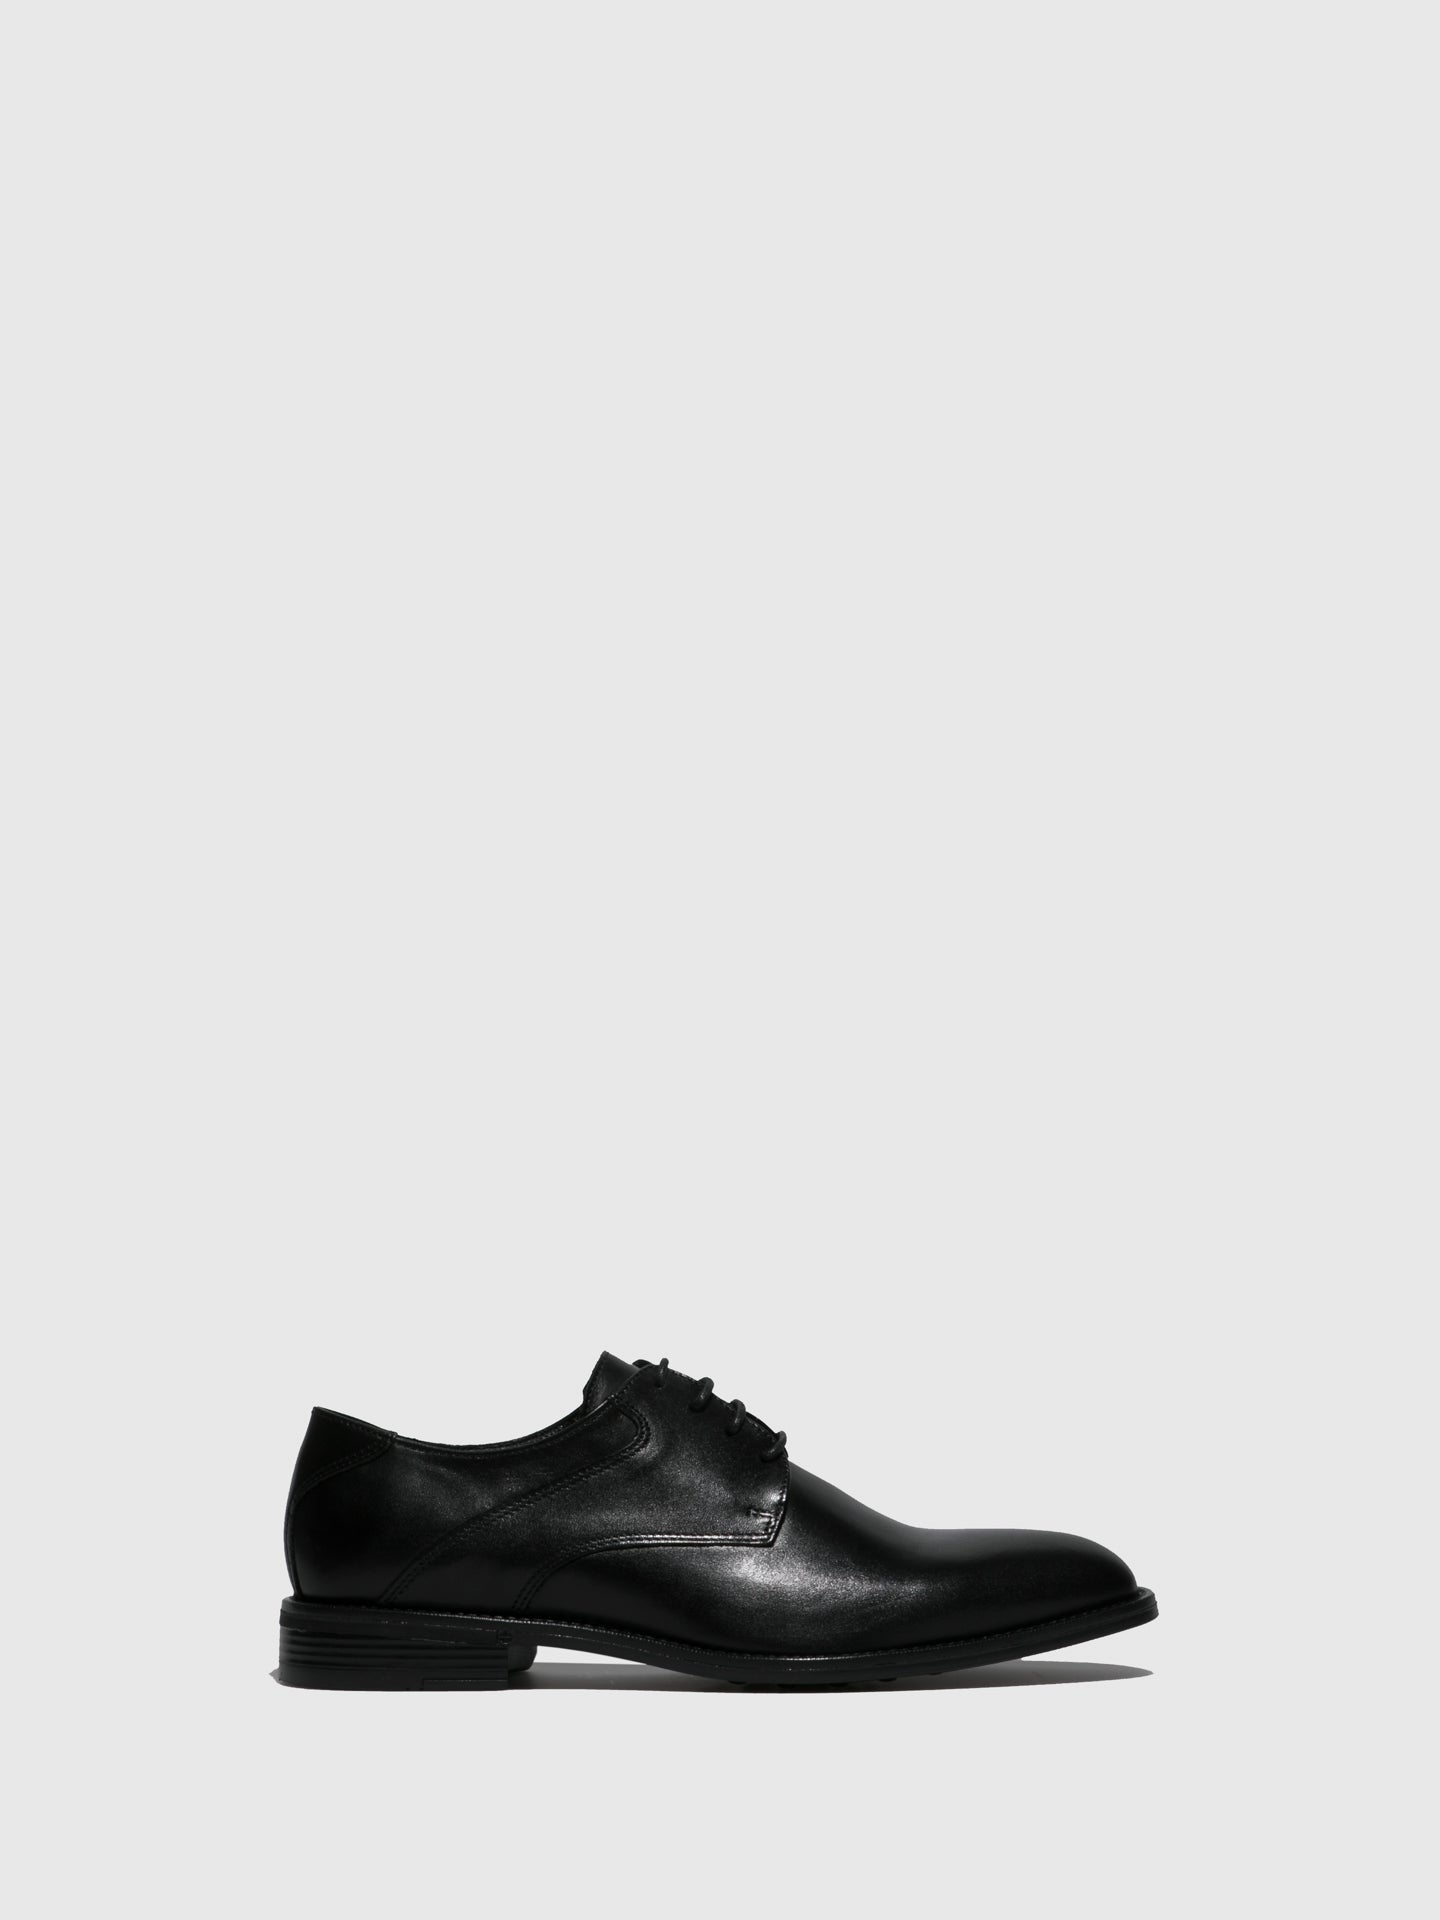 Foreva Black Lace-up Shoes